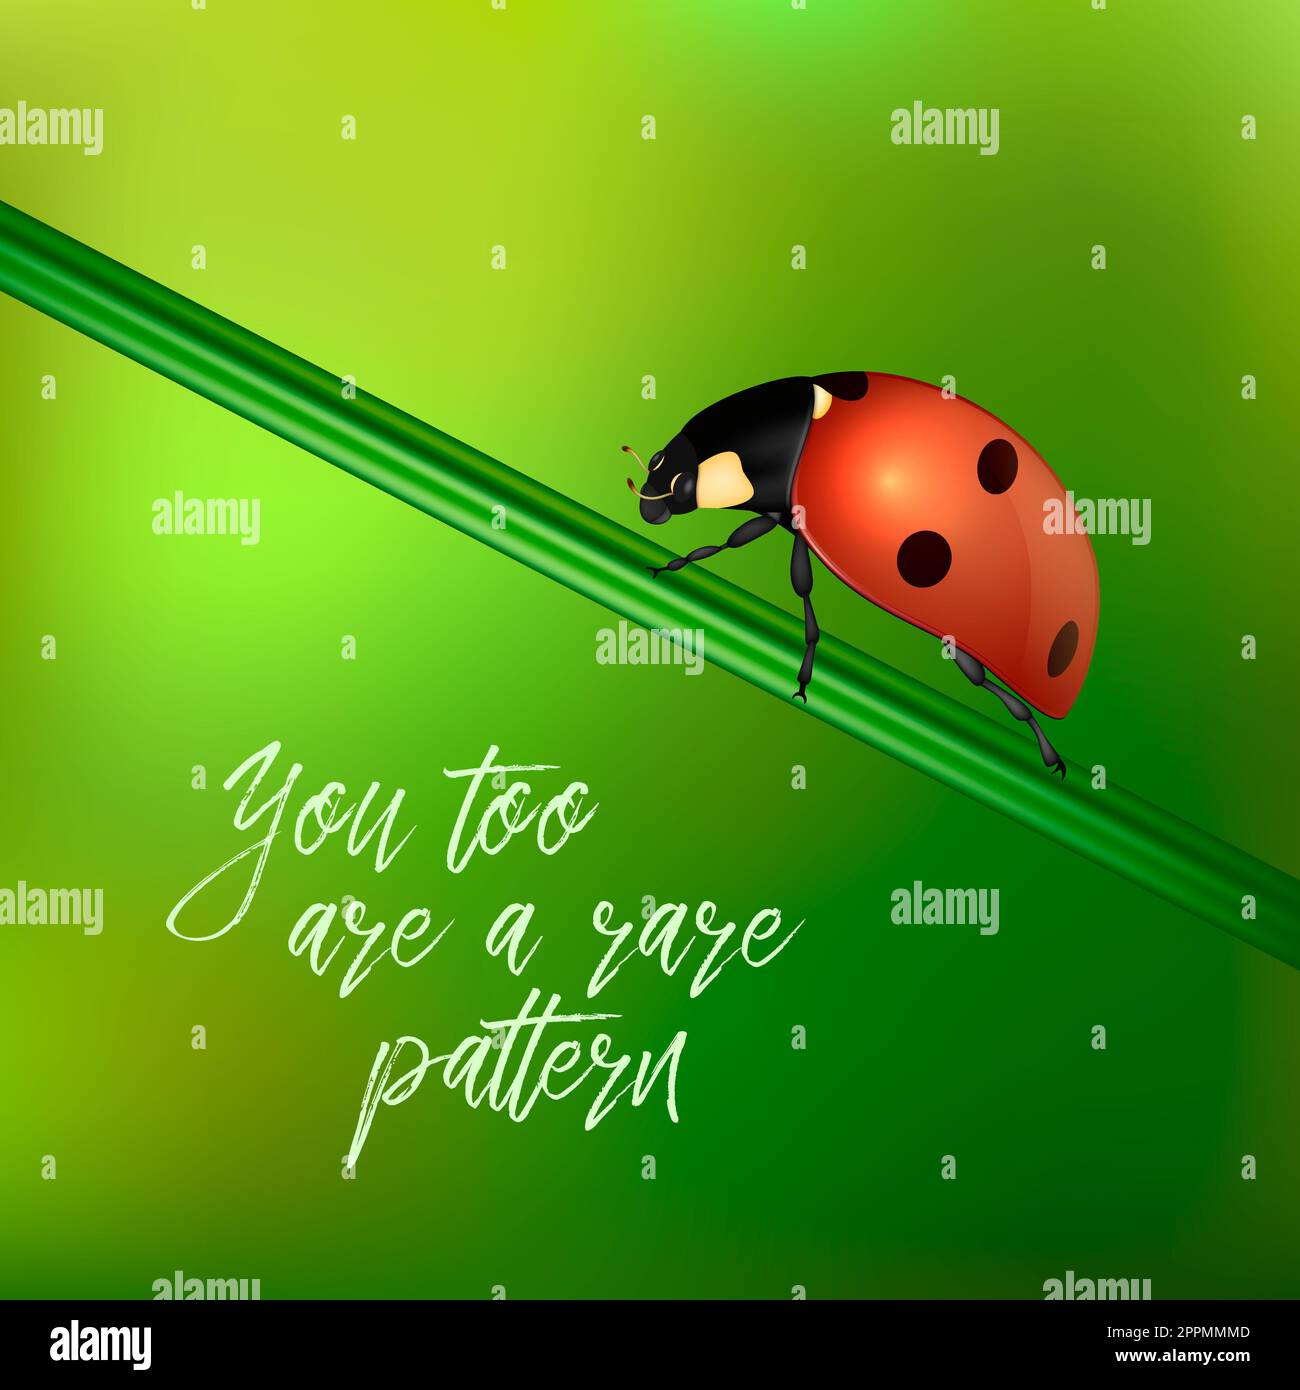 Yoy too are a rare pattern - vector background with quote and realistic ladybug insect on a blurred green. EPS10. Stock Photo